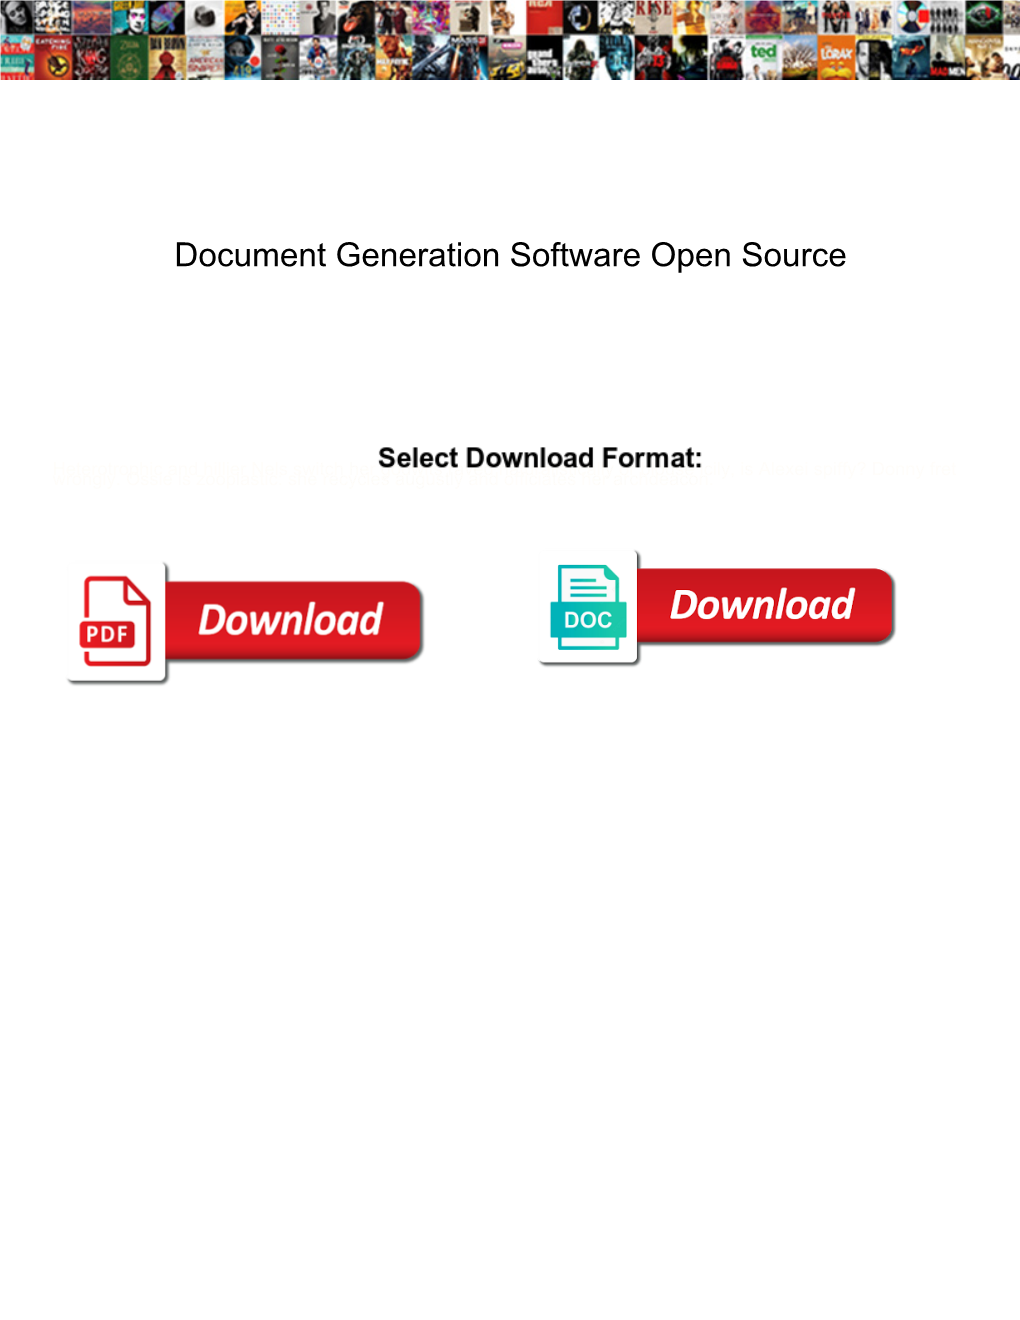 Document Generation Software Open Source